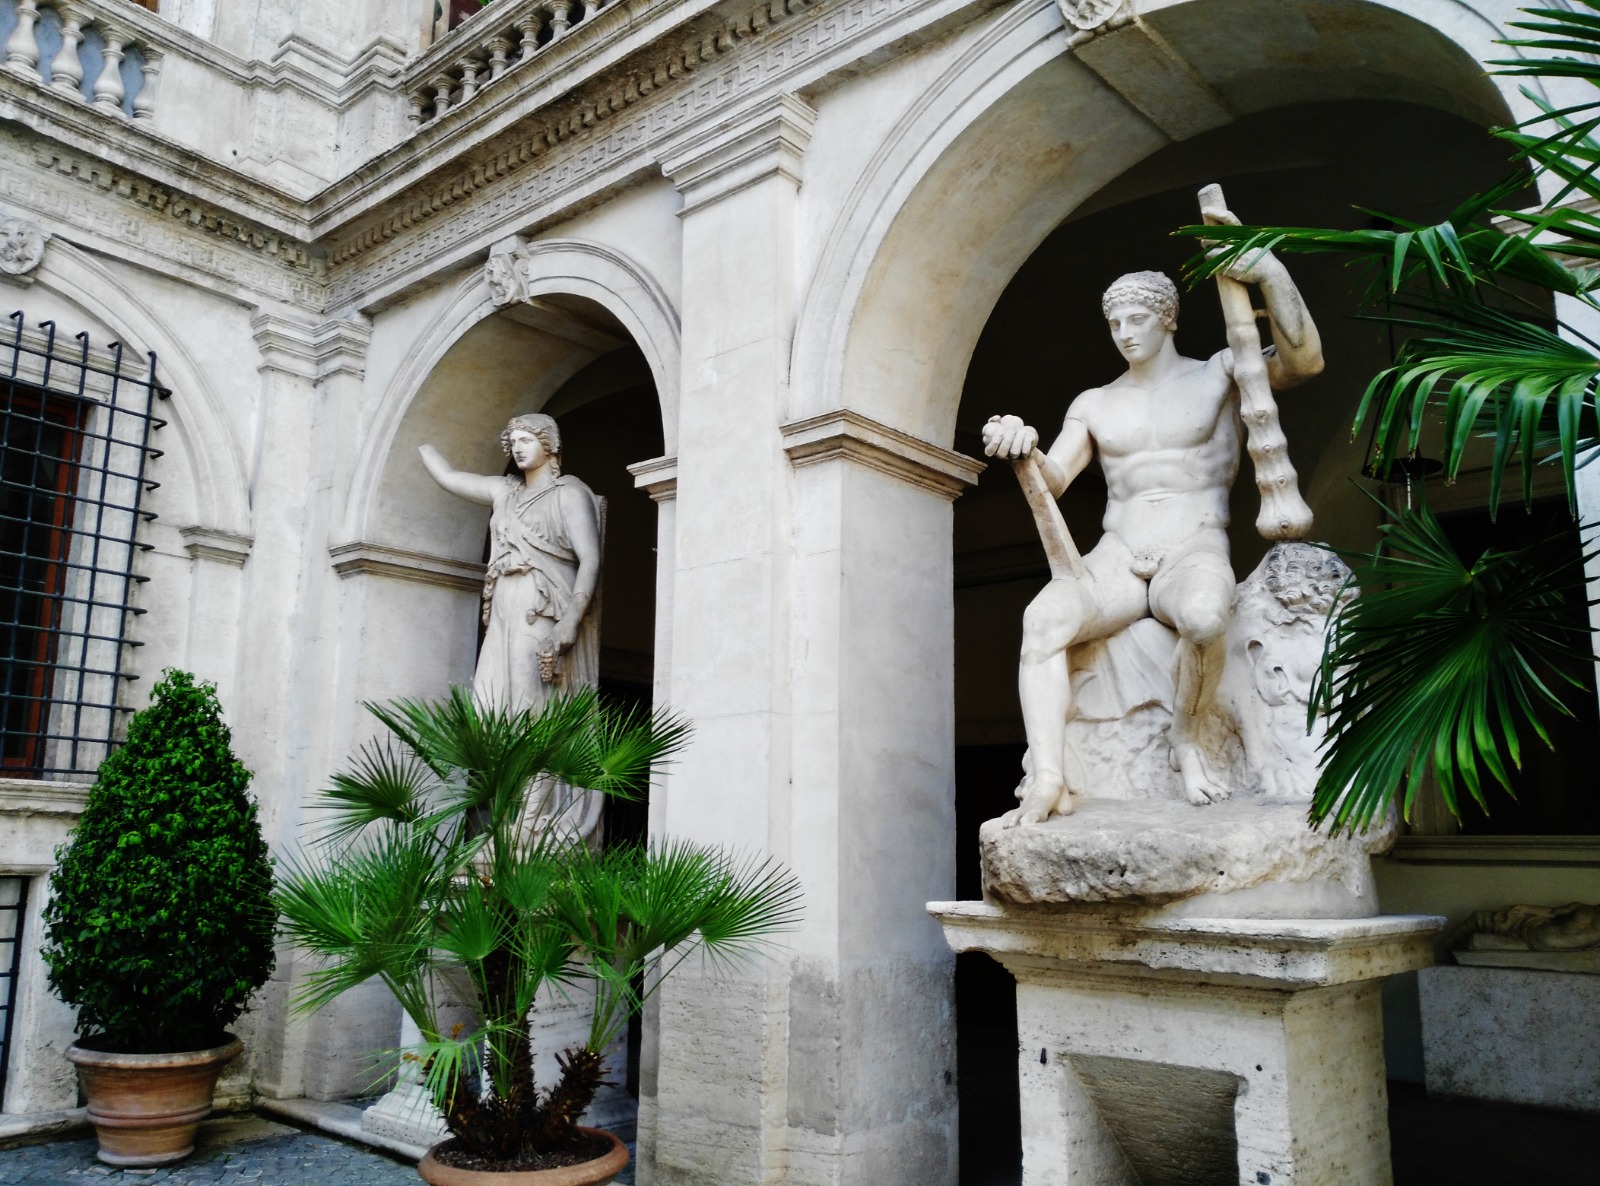 Palazzo Altemps Reserved Entrance Ticket - Rome - 